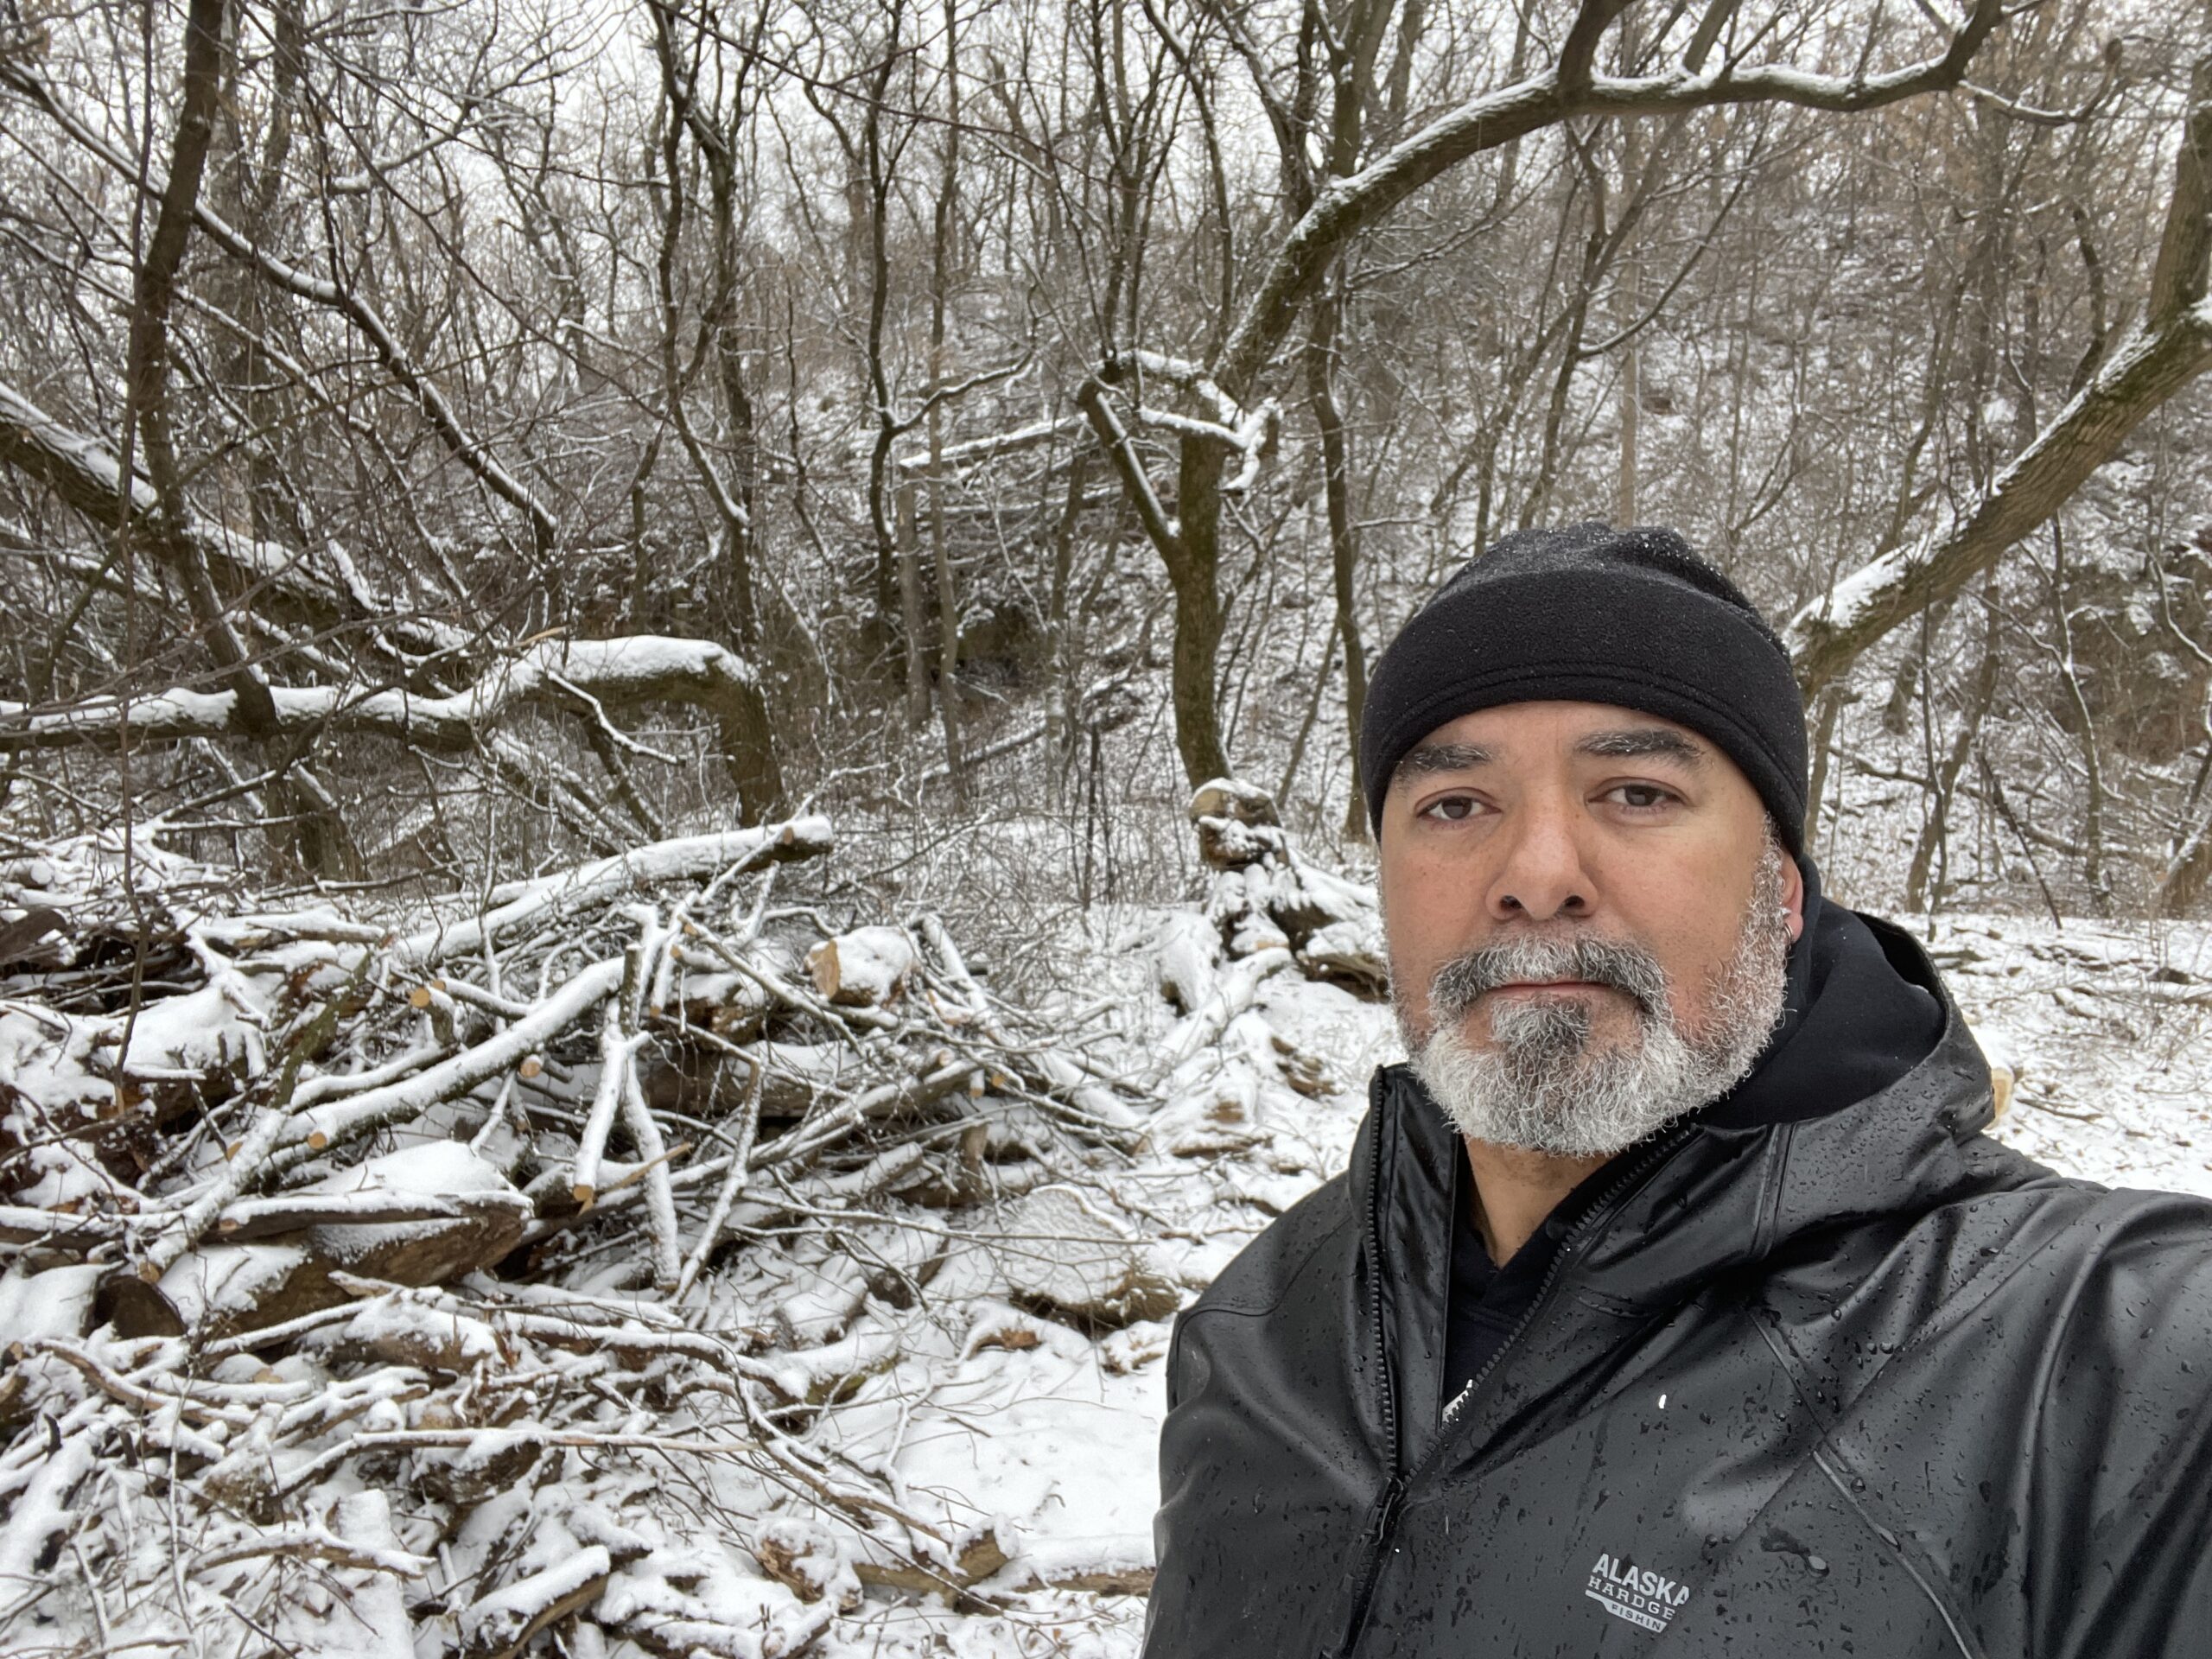 Christopher Kilgour takes a selfie in front of snowy woods